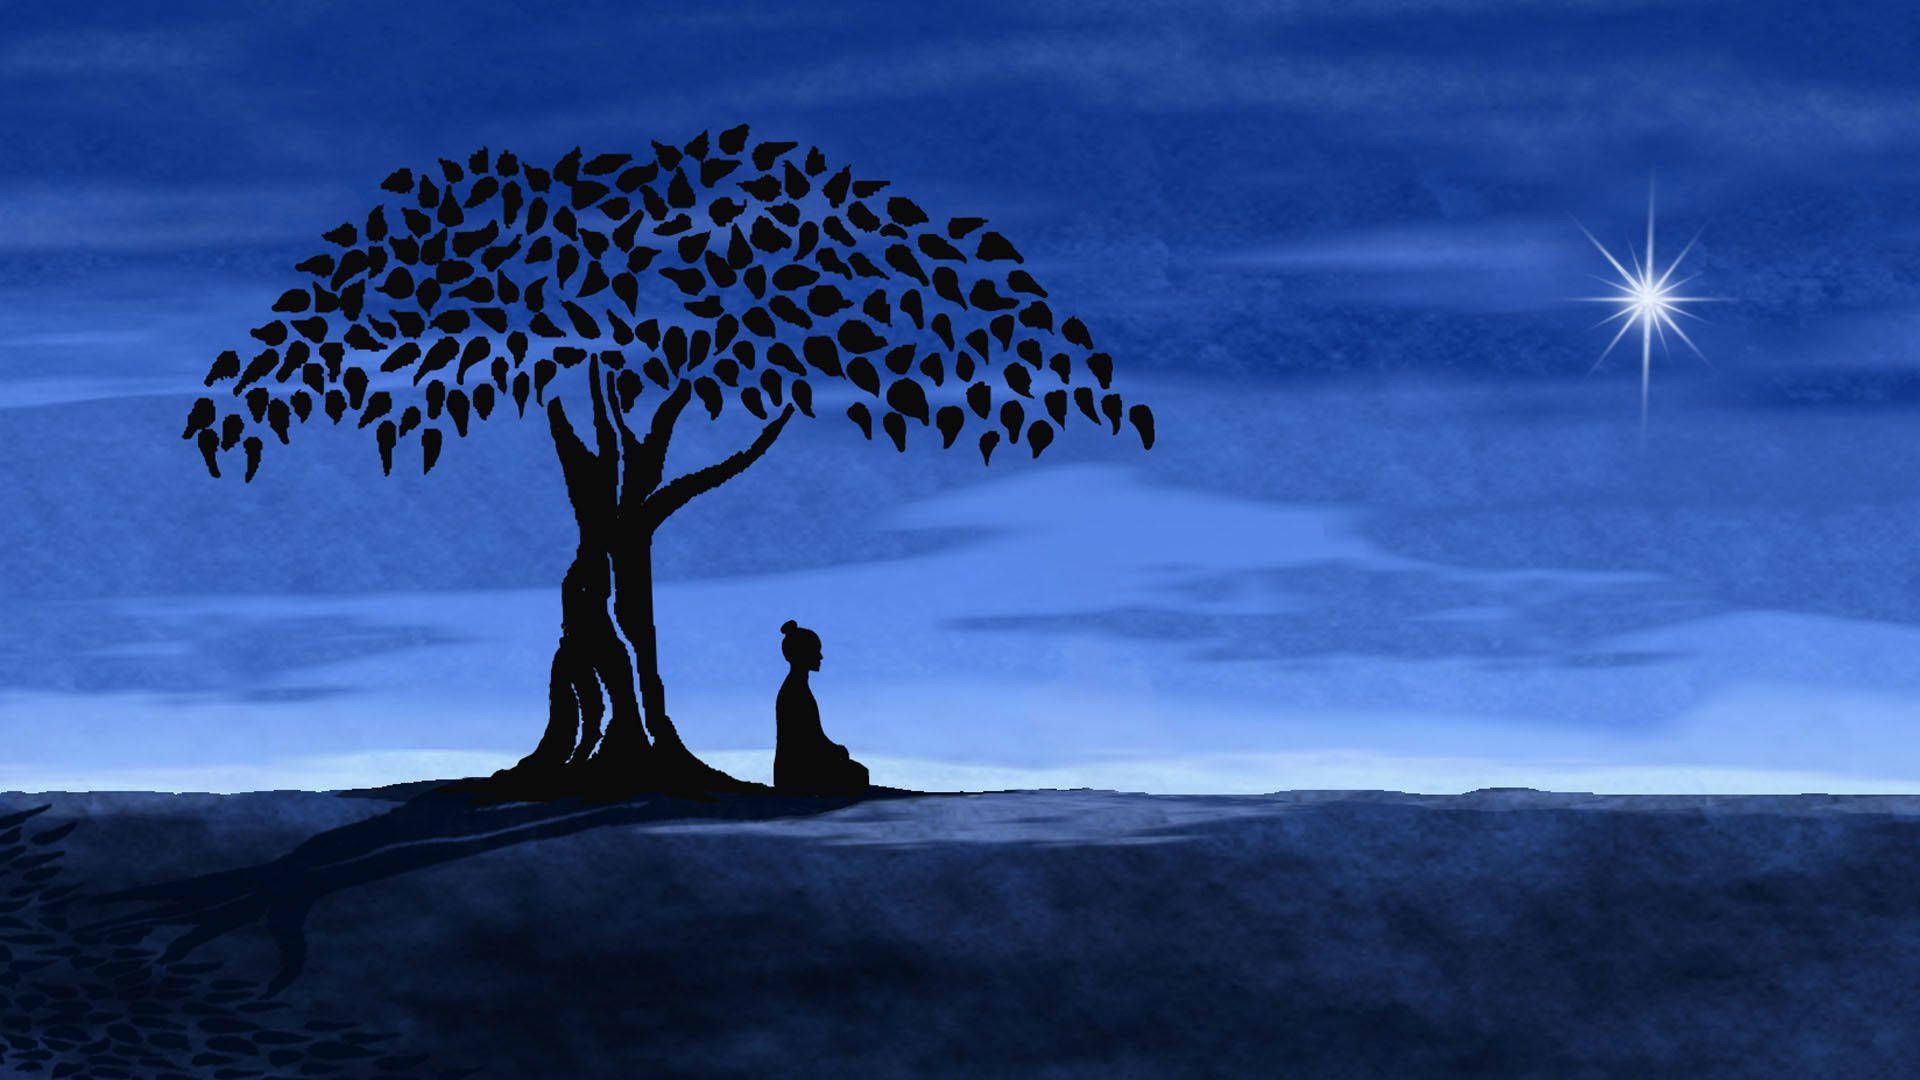 A person sitting underneath the tree at night - Spiritual